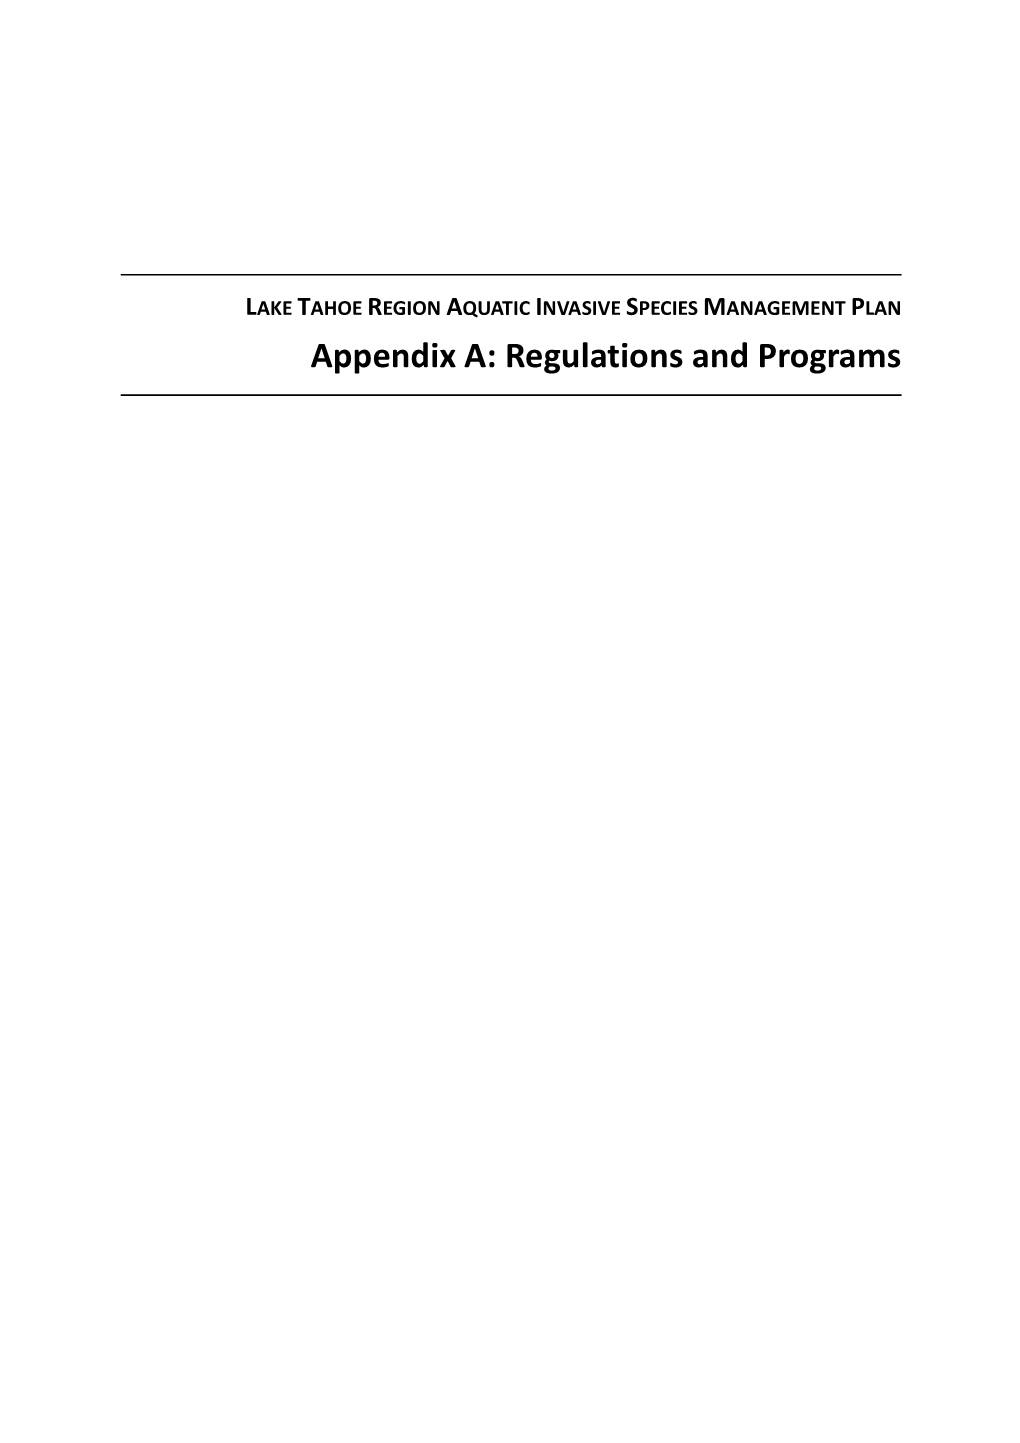 LAKE TAHOE REGION AQUATIC INVASIVE SPECIES MANAGEMENT PLAN Appendix A: Regulations and Programs This Page Intentionally Blank AQUATIC INVASIVE SPECIES MANAGEMENT PLAN